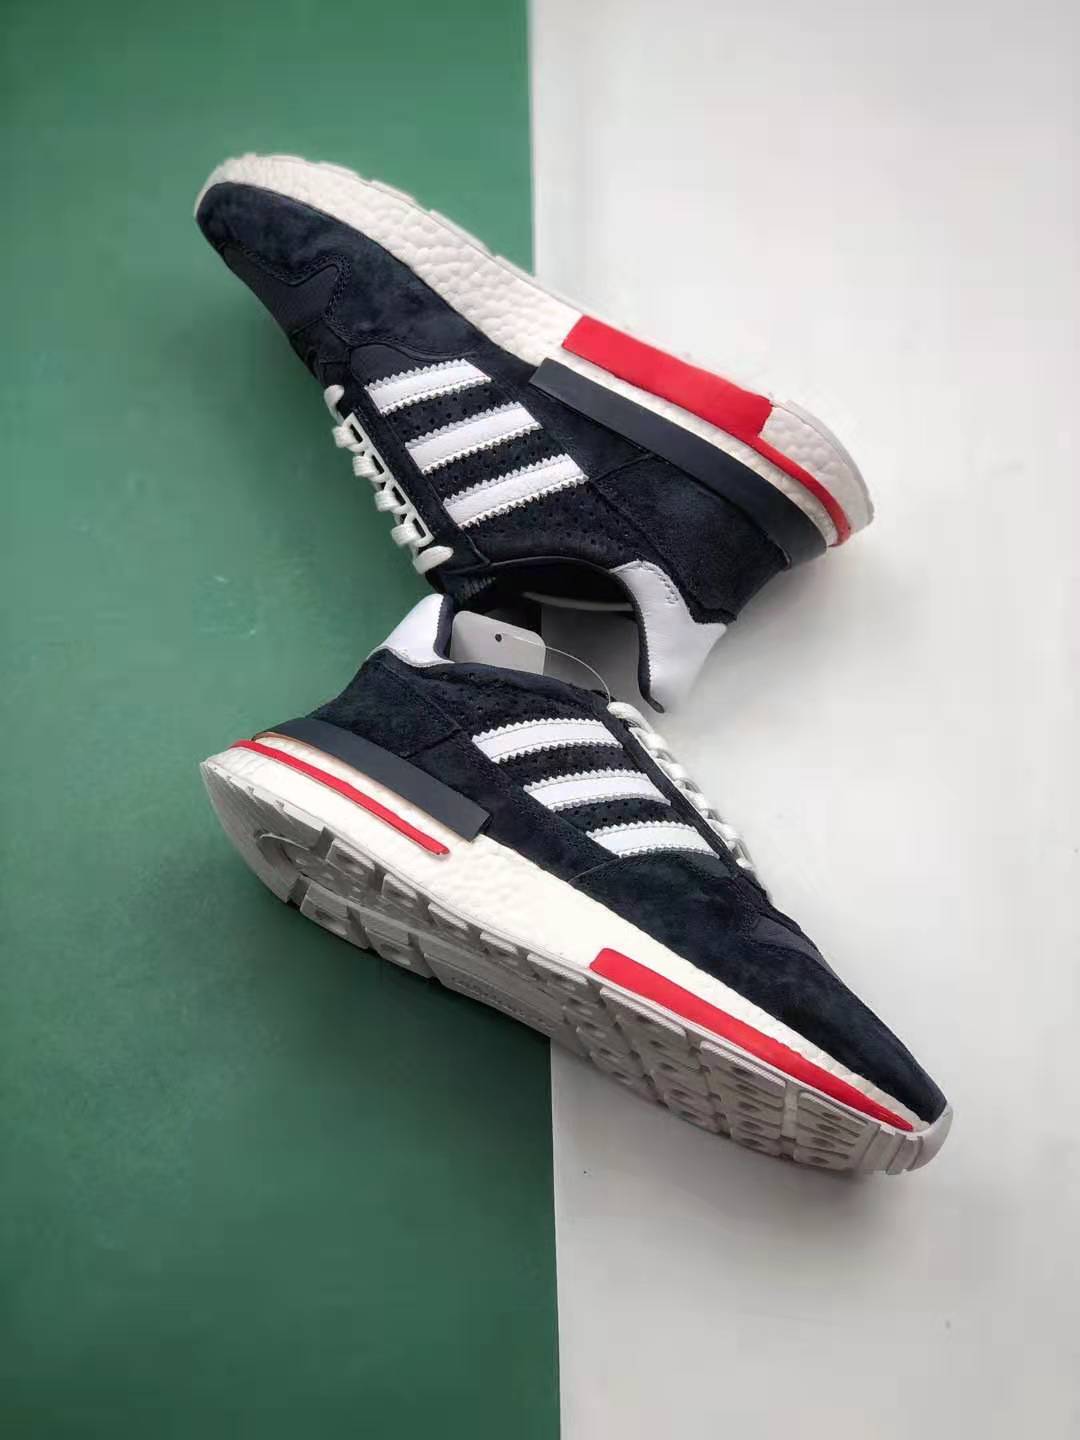 Adidas Clover ZX 500 Cloud White Blue Red Shoes - BB6843